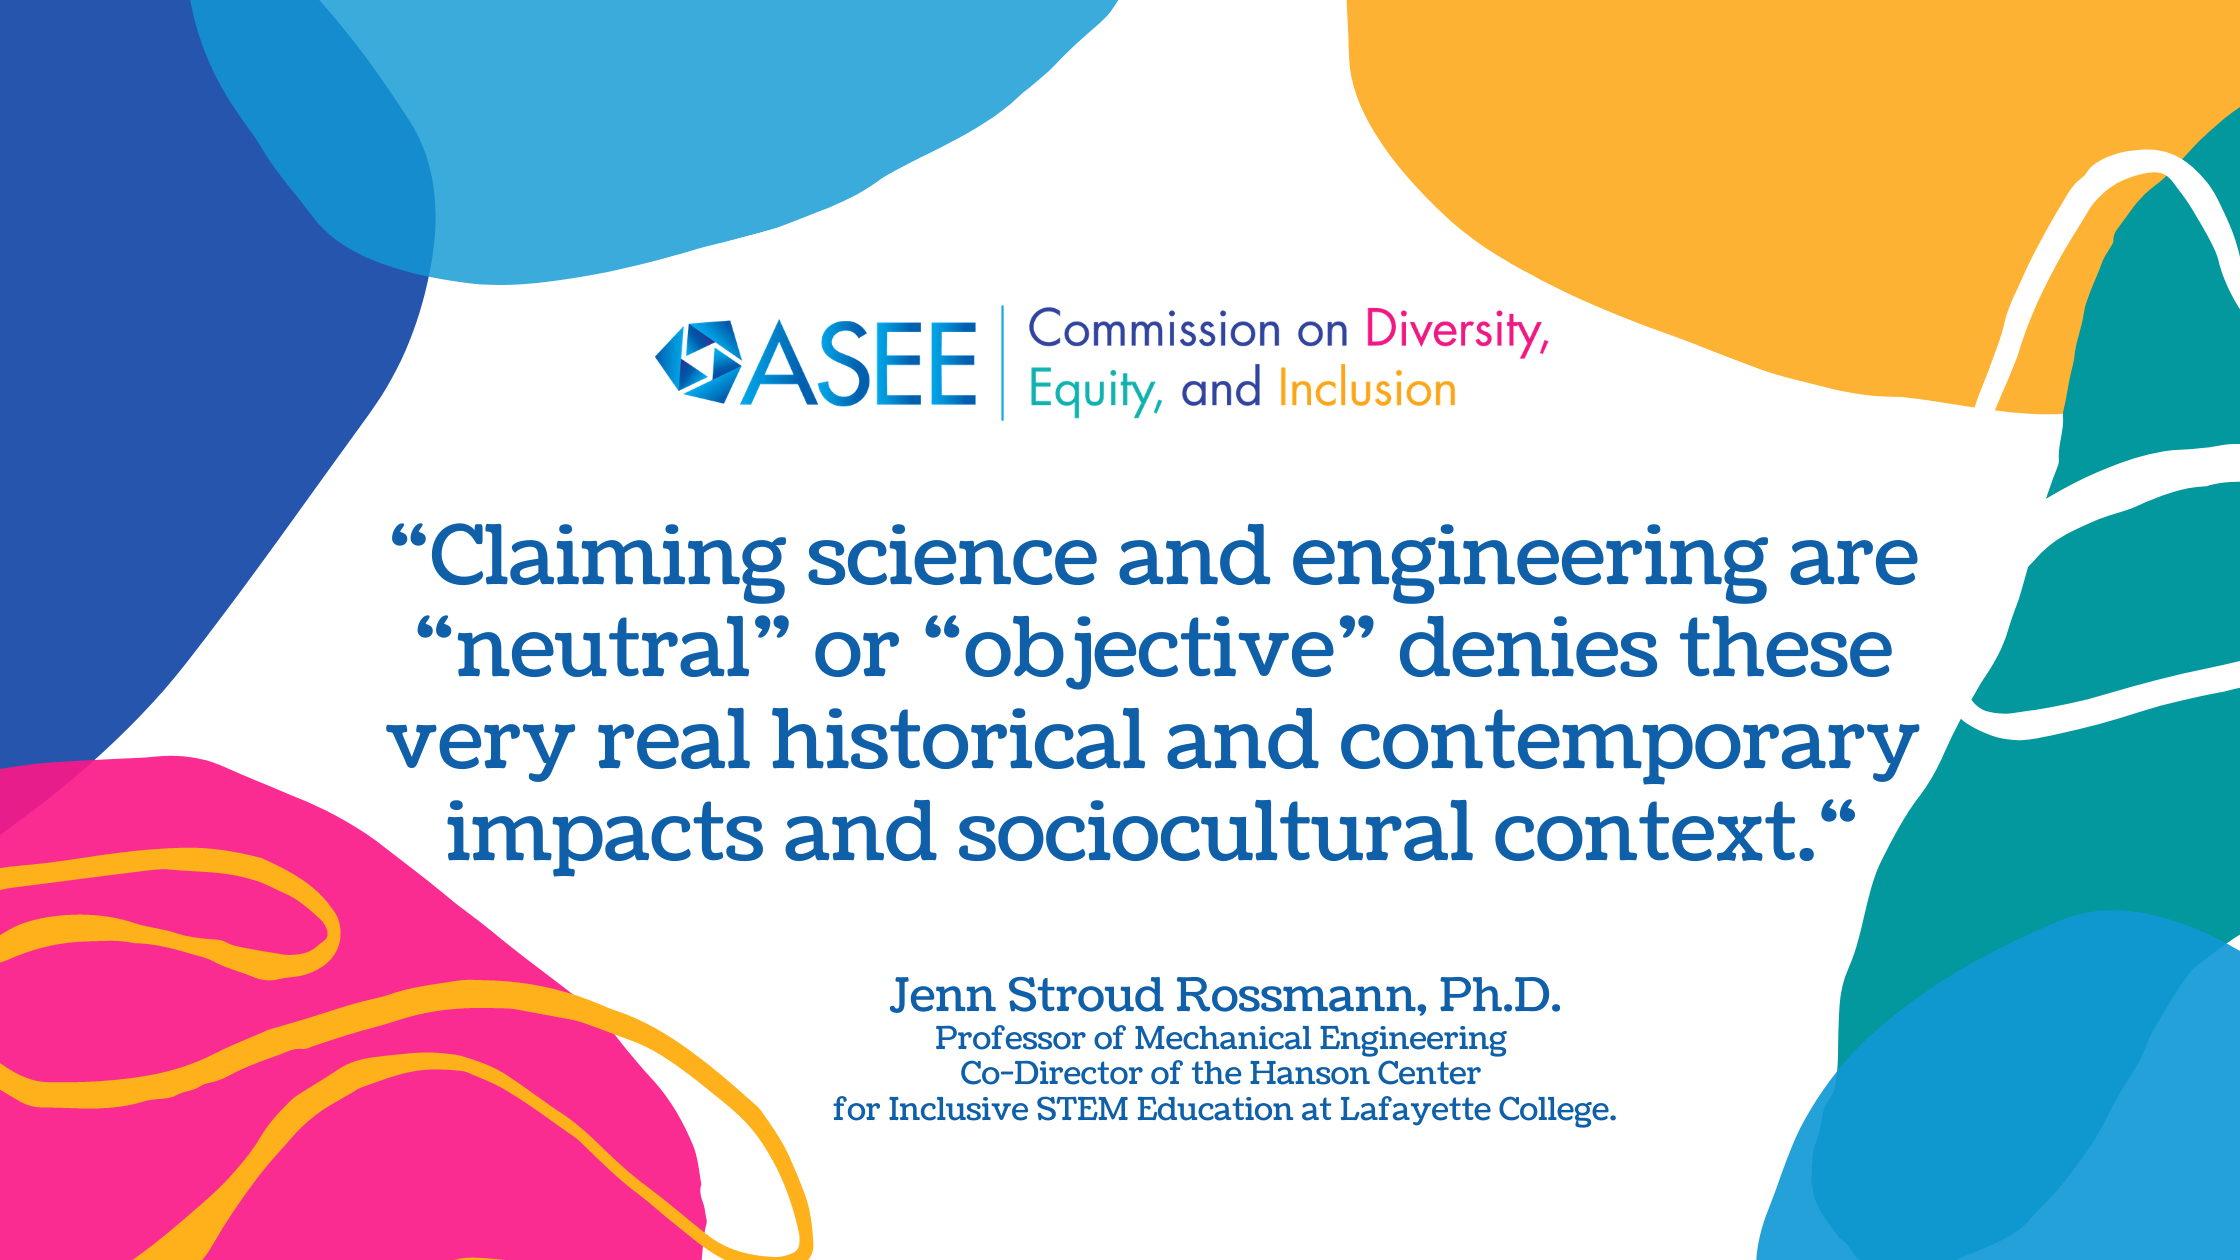 Quote: “Claiming science and engineering are “neutral” or “objective” denies these very real historical and contemporary impacts and sociocultural context.“